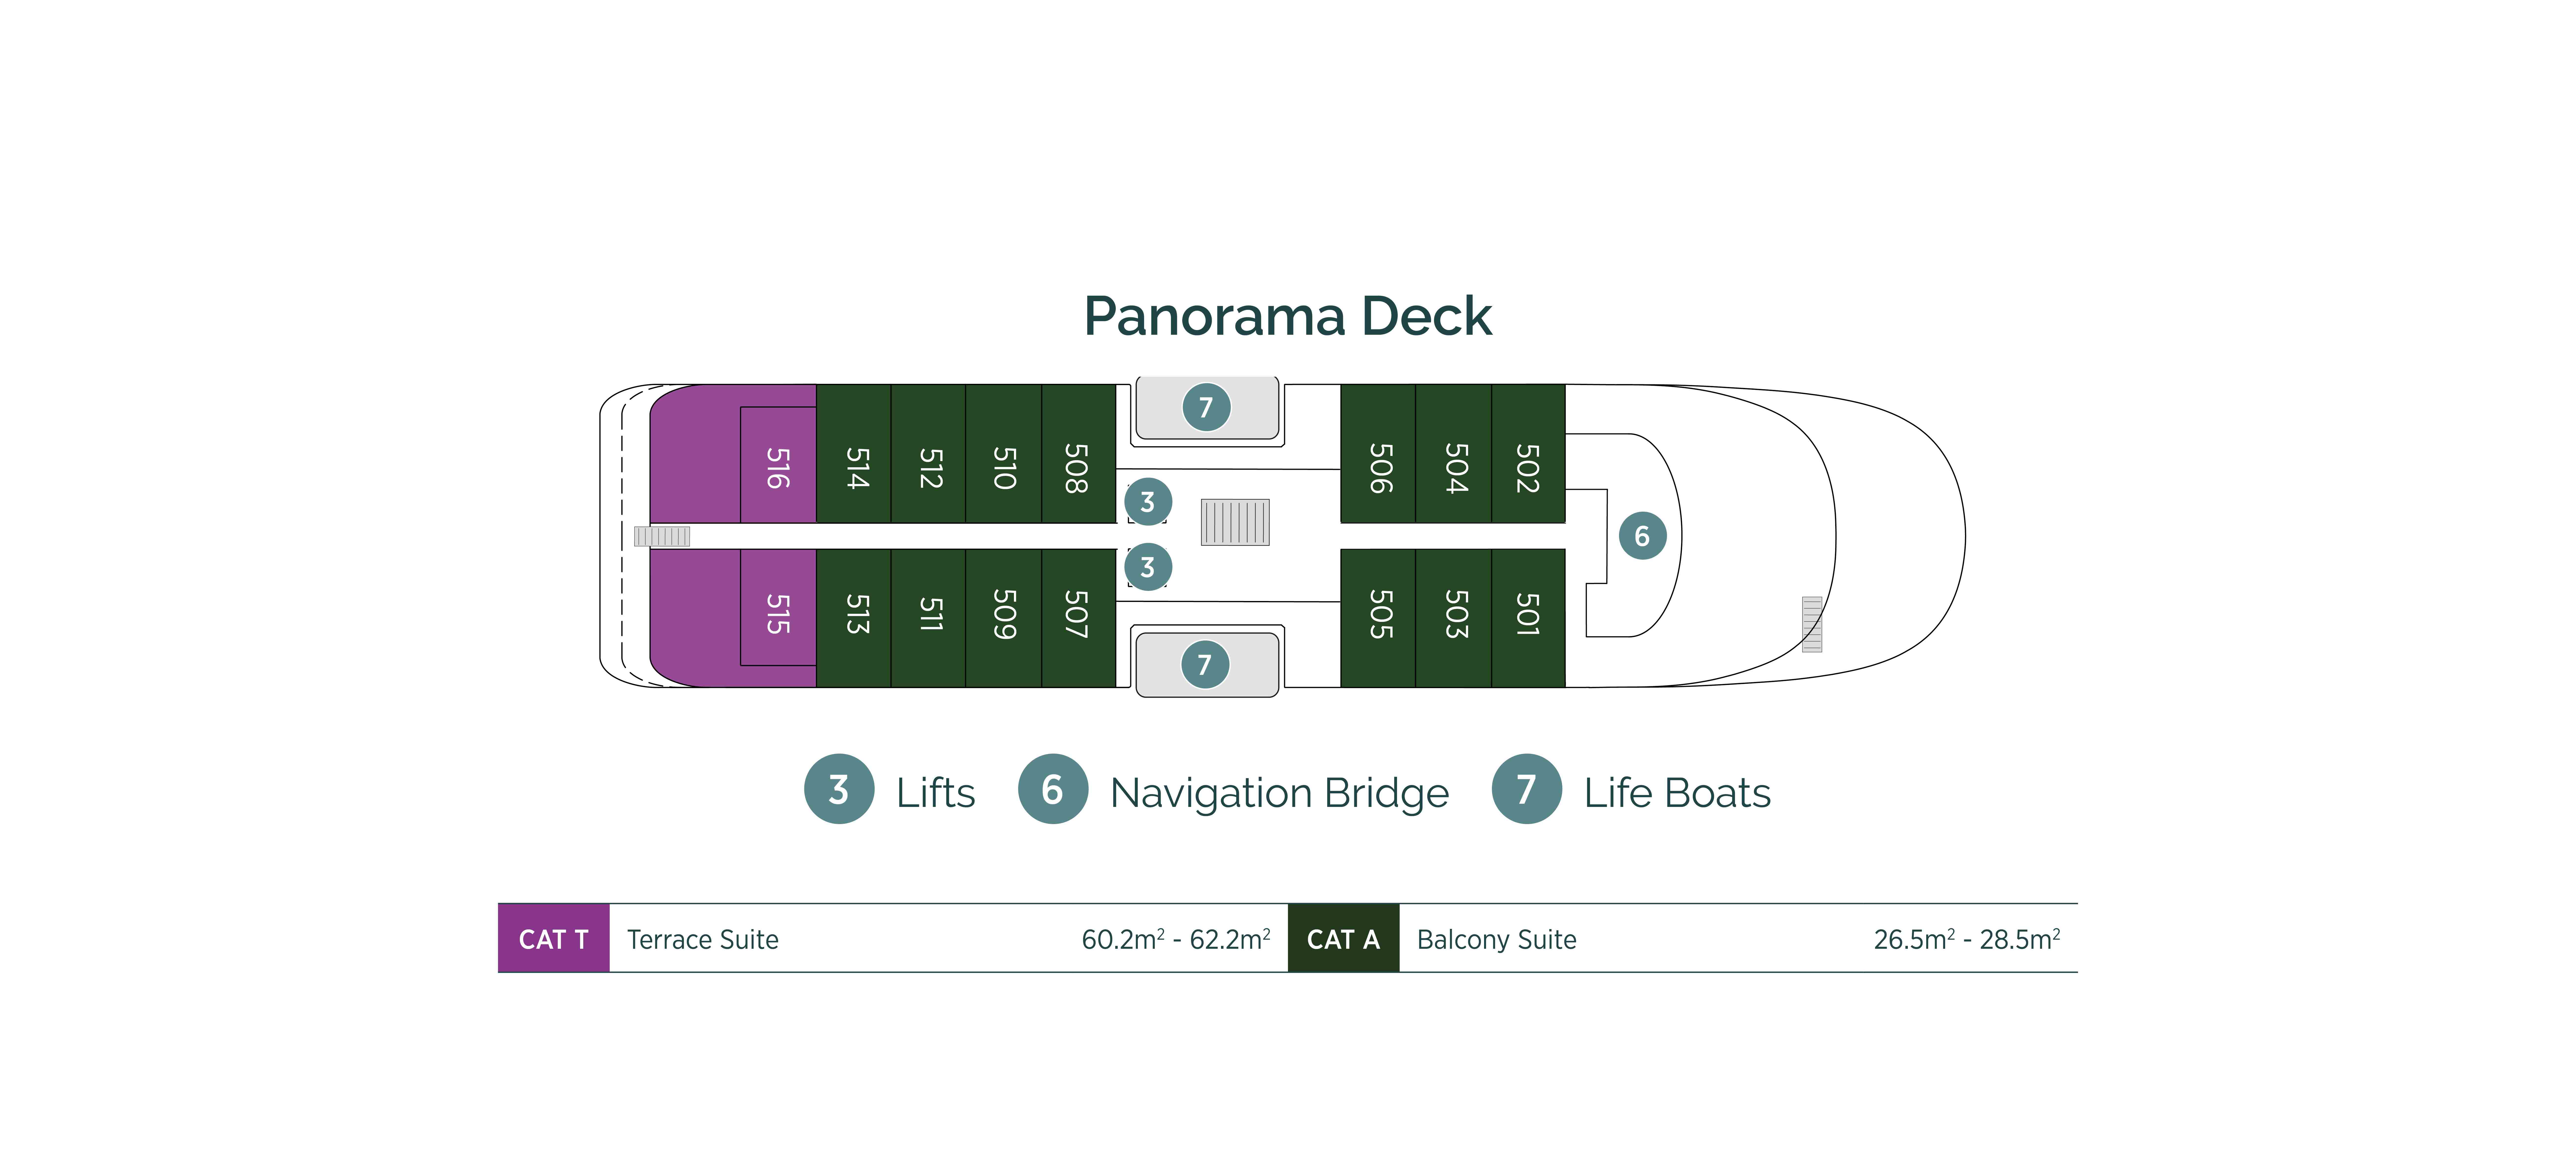 Diagram of ship layout for the Panorama Deck of an Emerald Cruises luxury yacht